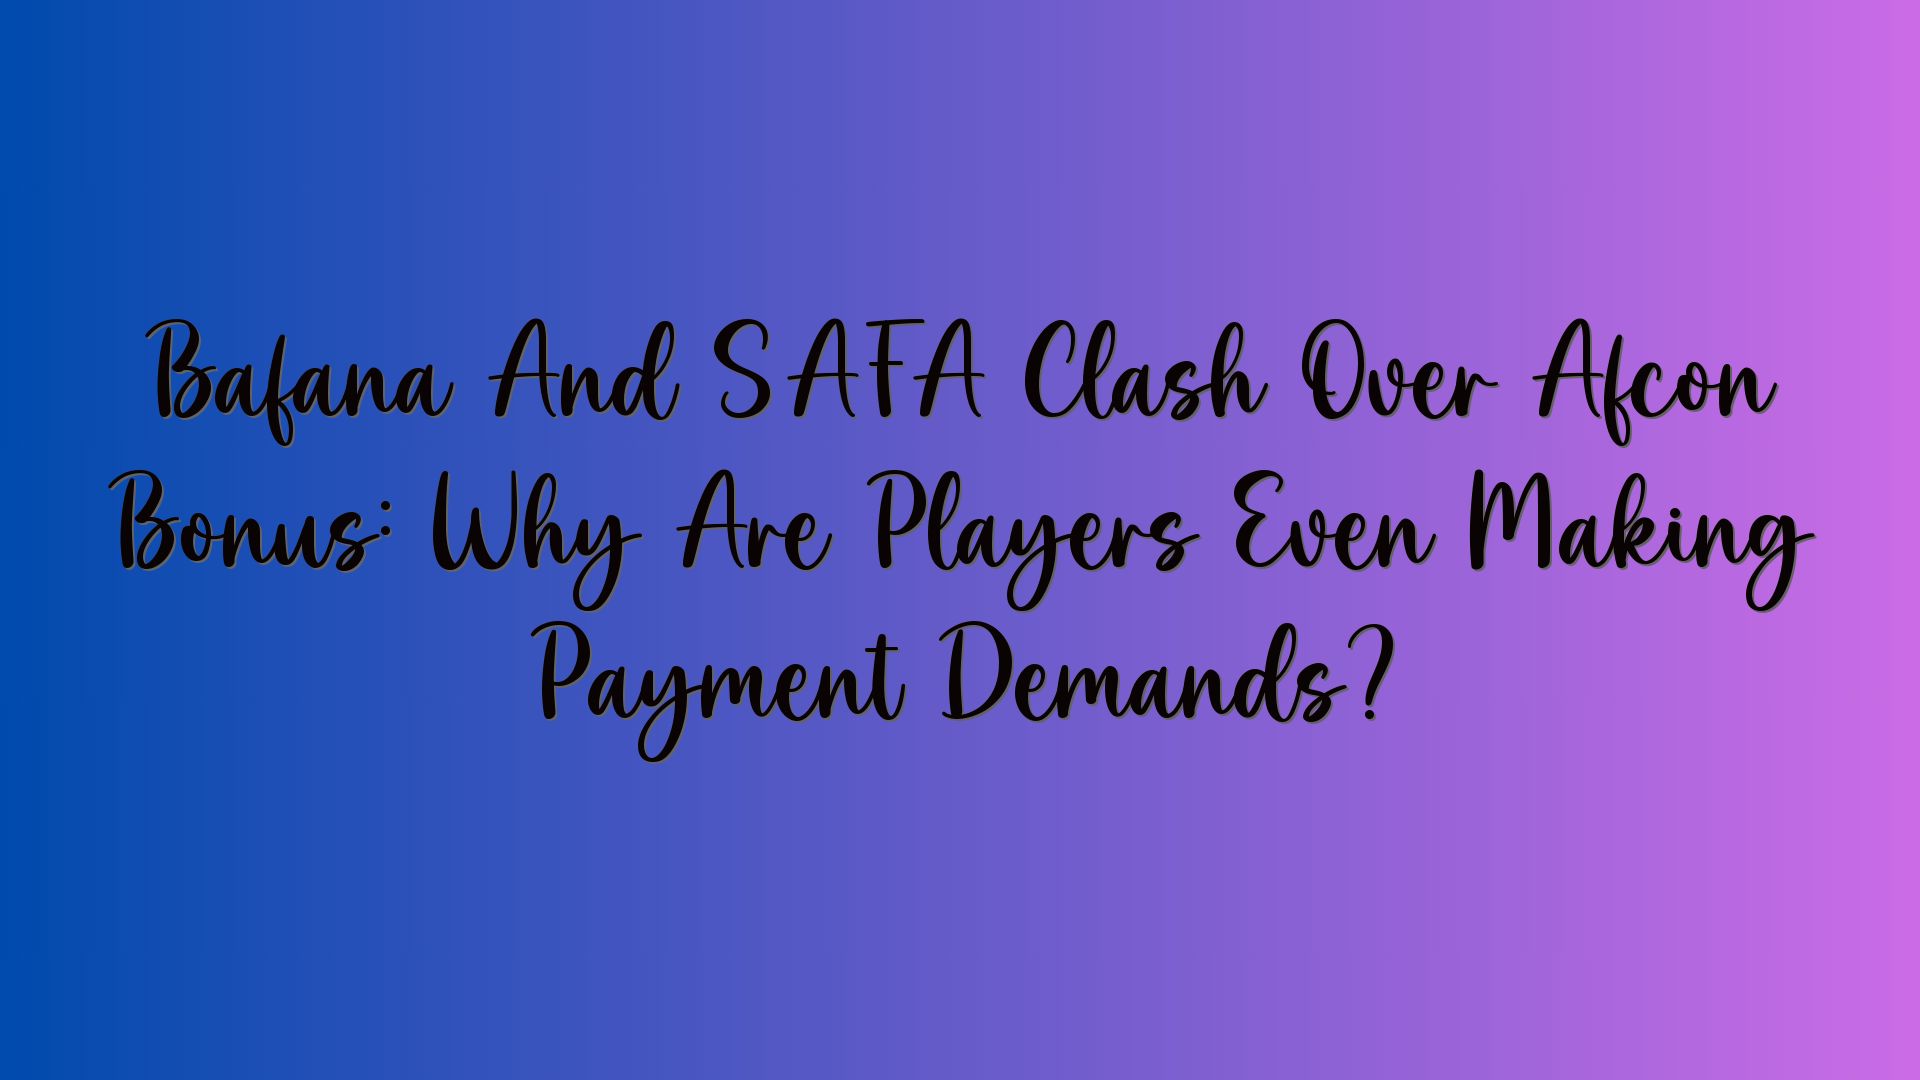 Bafana And SAFA Clash Over Afcon Bonus: Why Are Players Even Making Payment Demands?